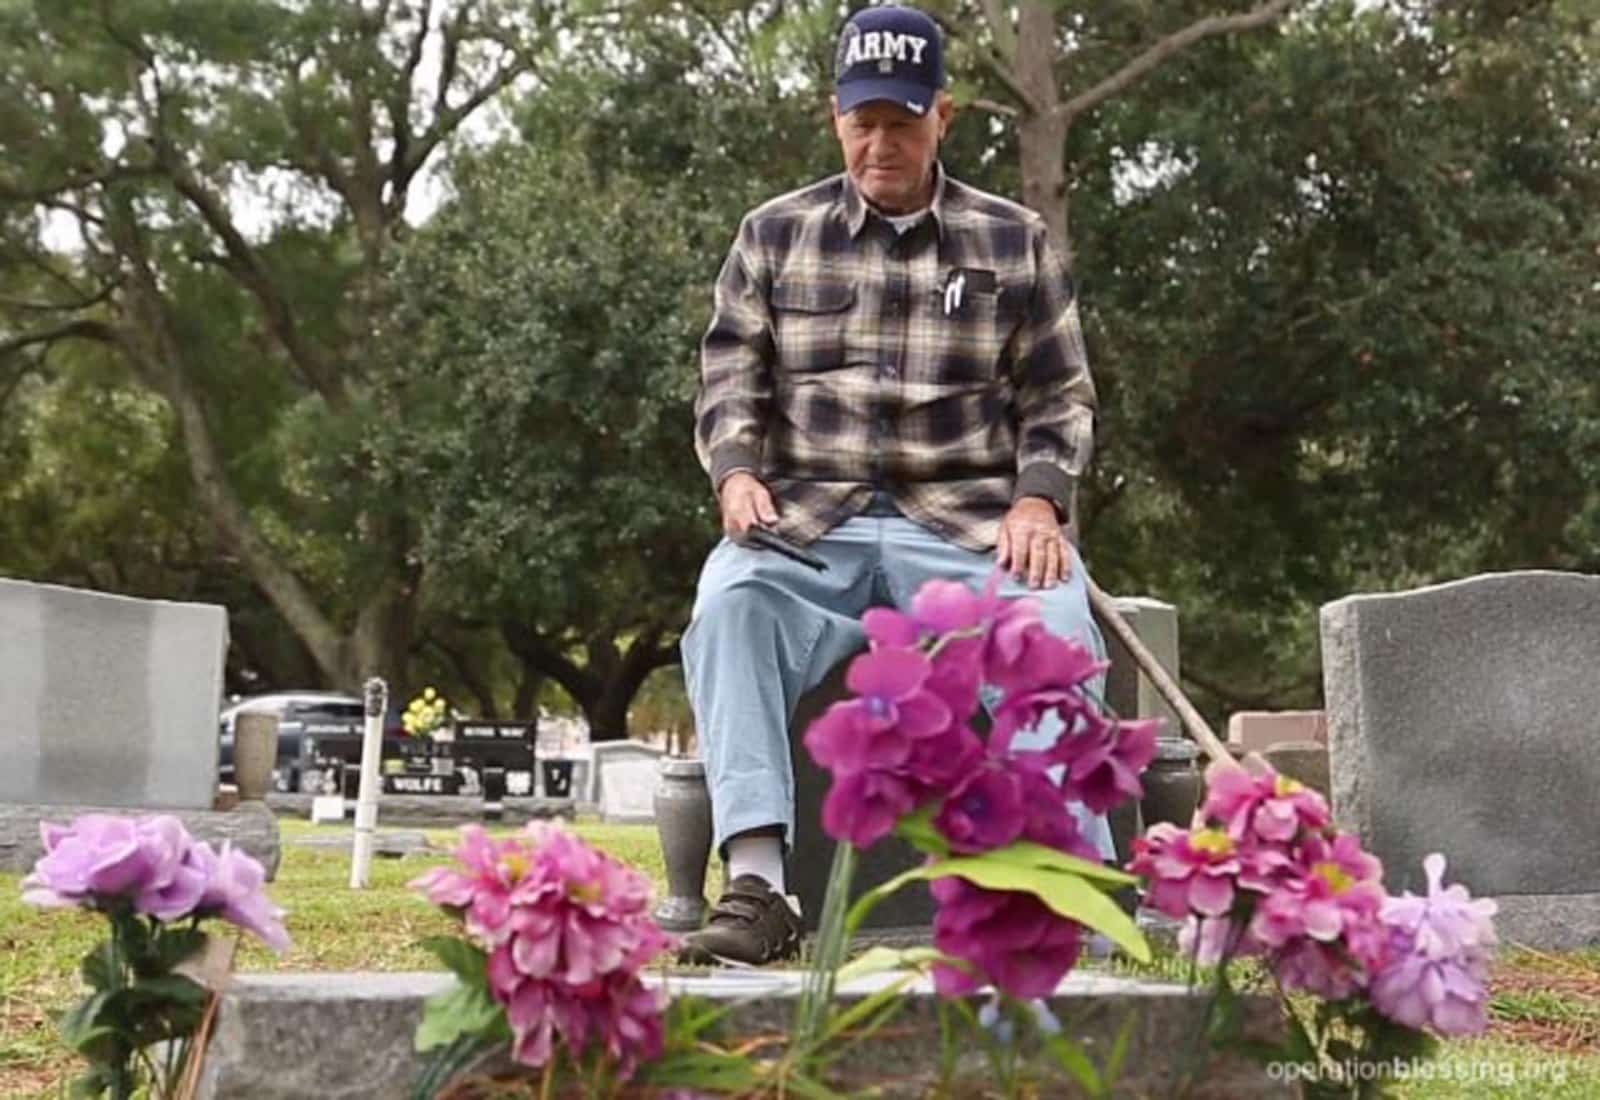 Allen still visits his wife’s grave and mourns her loss.